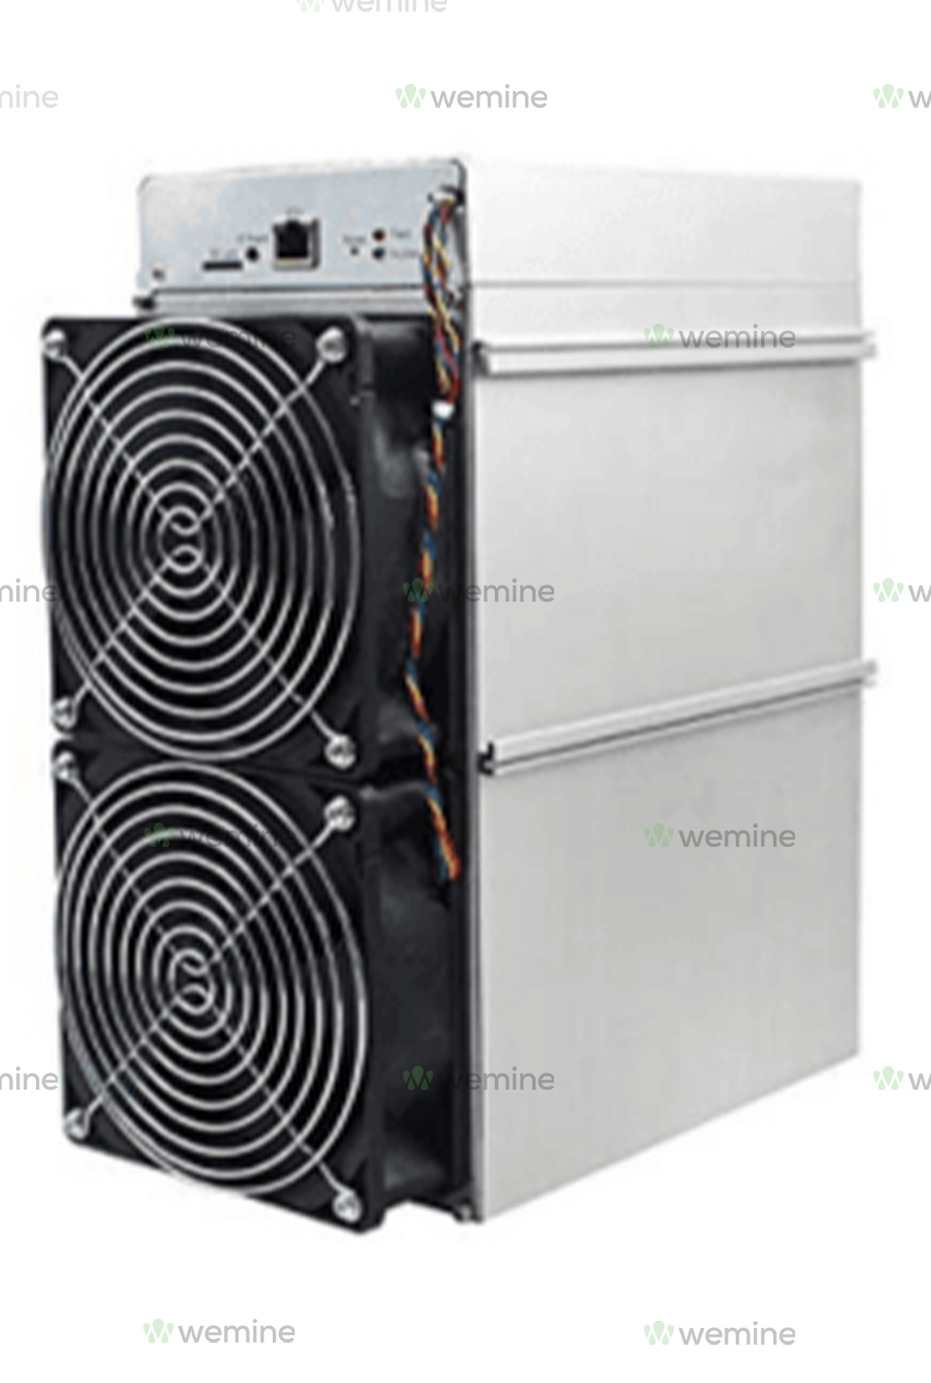 Antminer Z15 Pro cryptocurrency mining unit with a sleek silver body and dual black cooling fans on the front for high-performance crypto mining operations